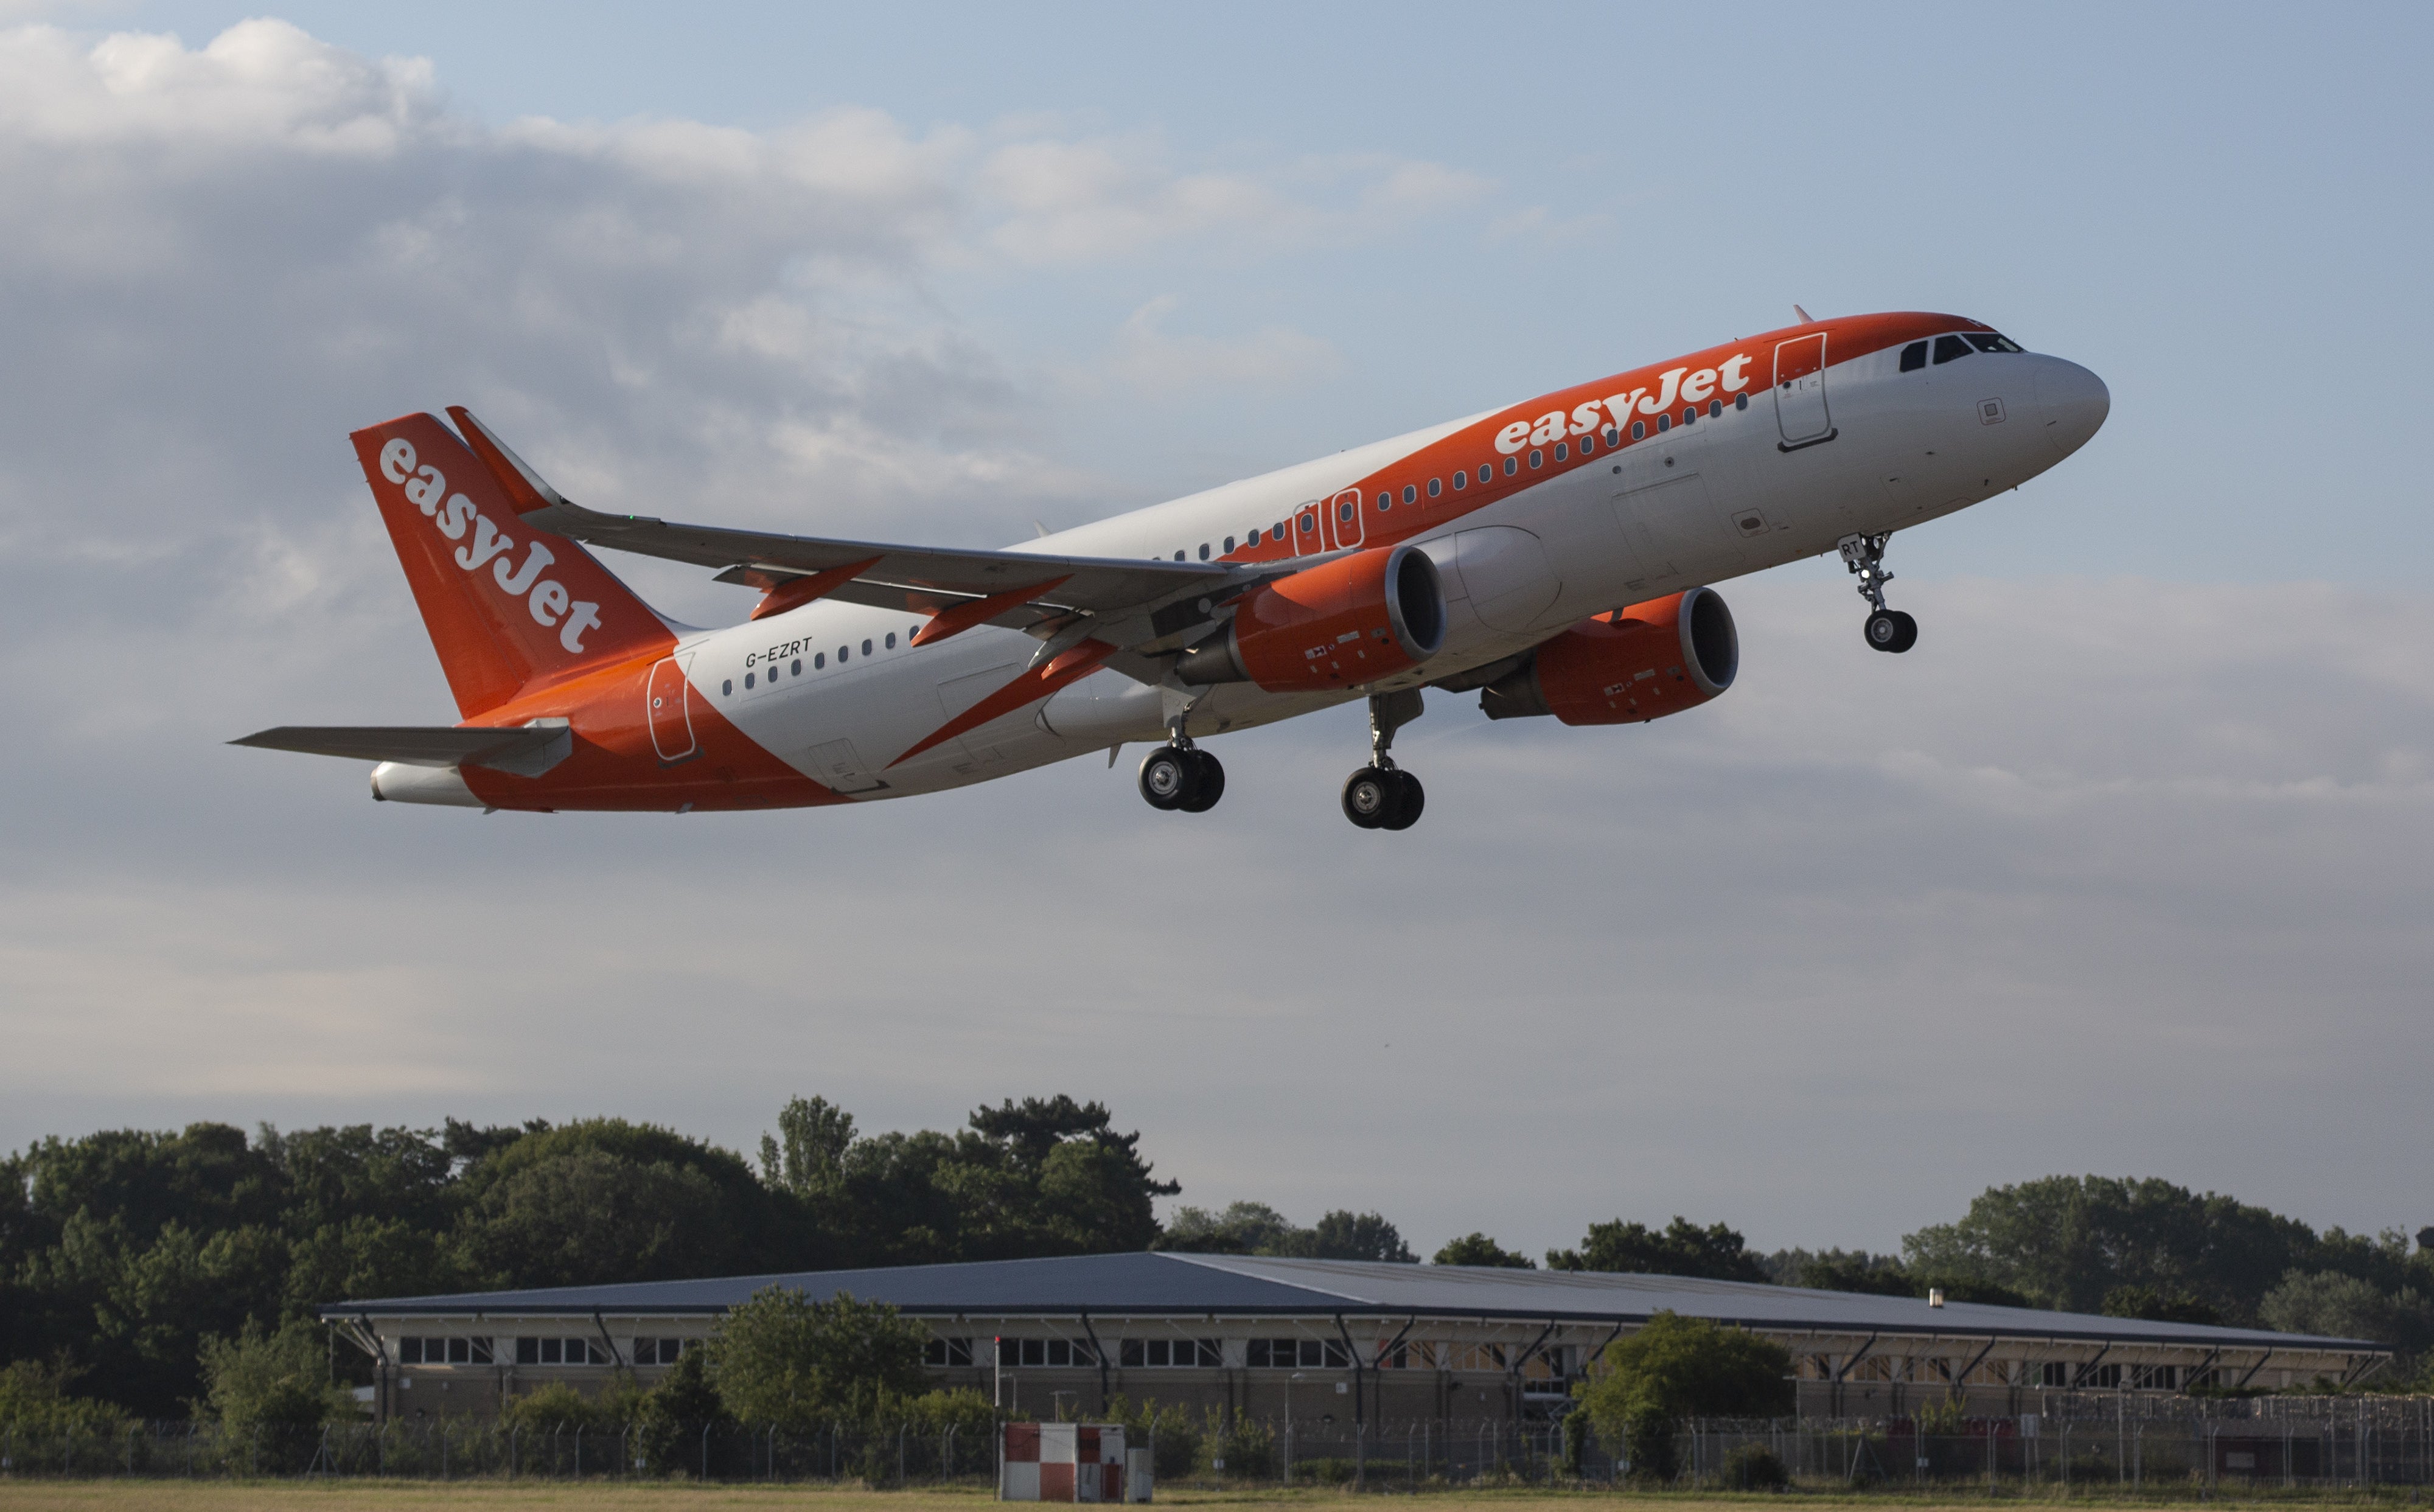 At least 60 UK flights were grounded by easyJet alone on Tuesday